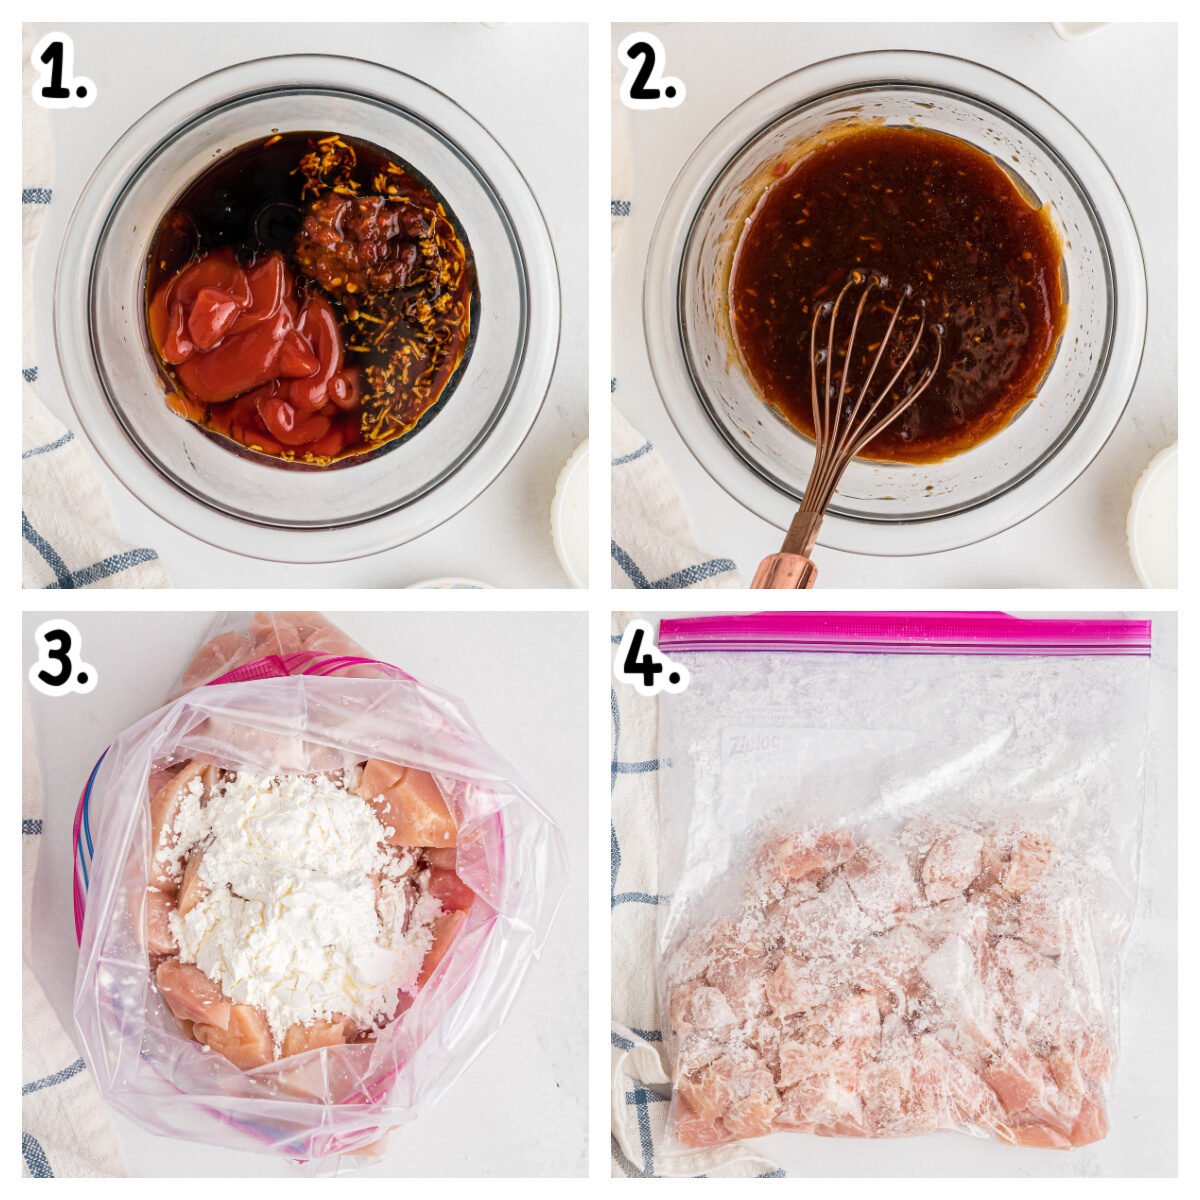 4 Images showing how to prepare the sauce and chicken for sweet and sour chicken.